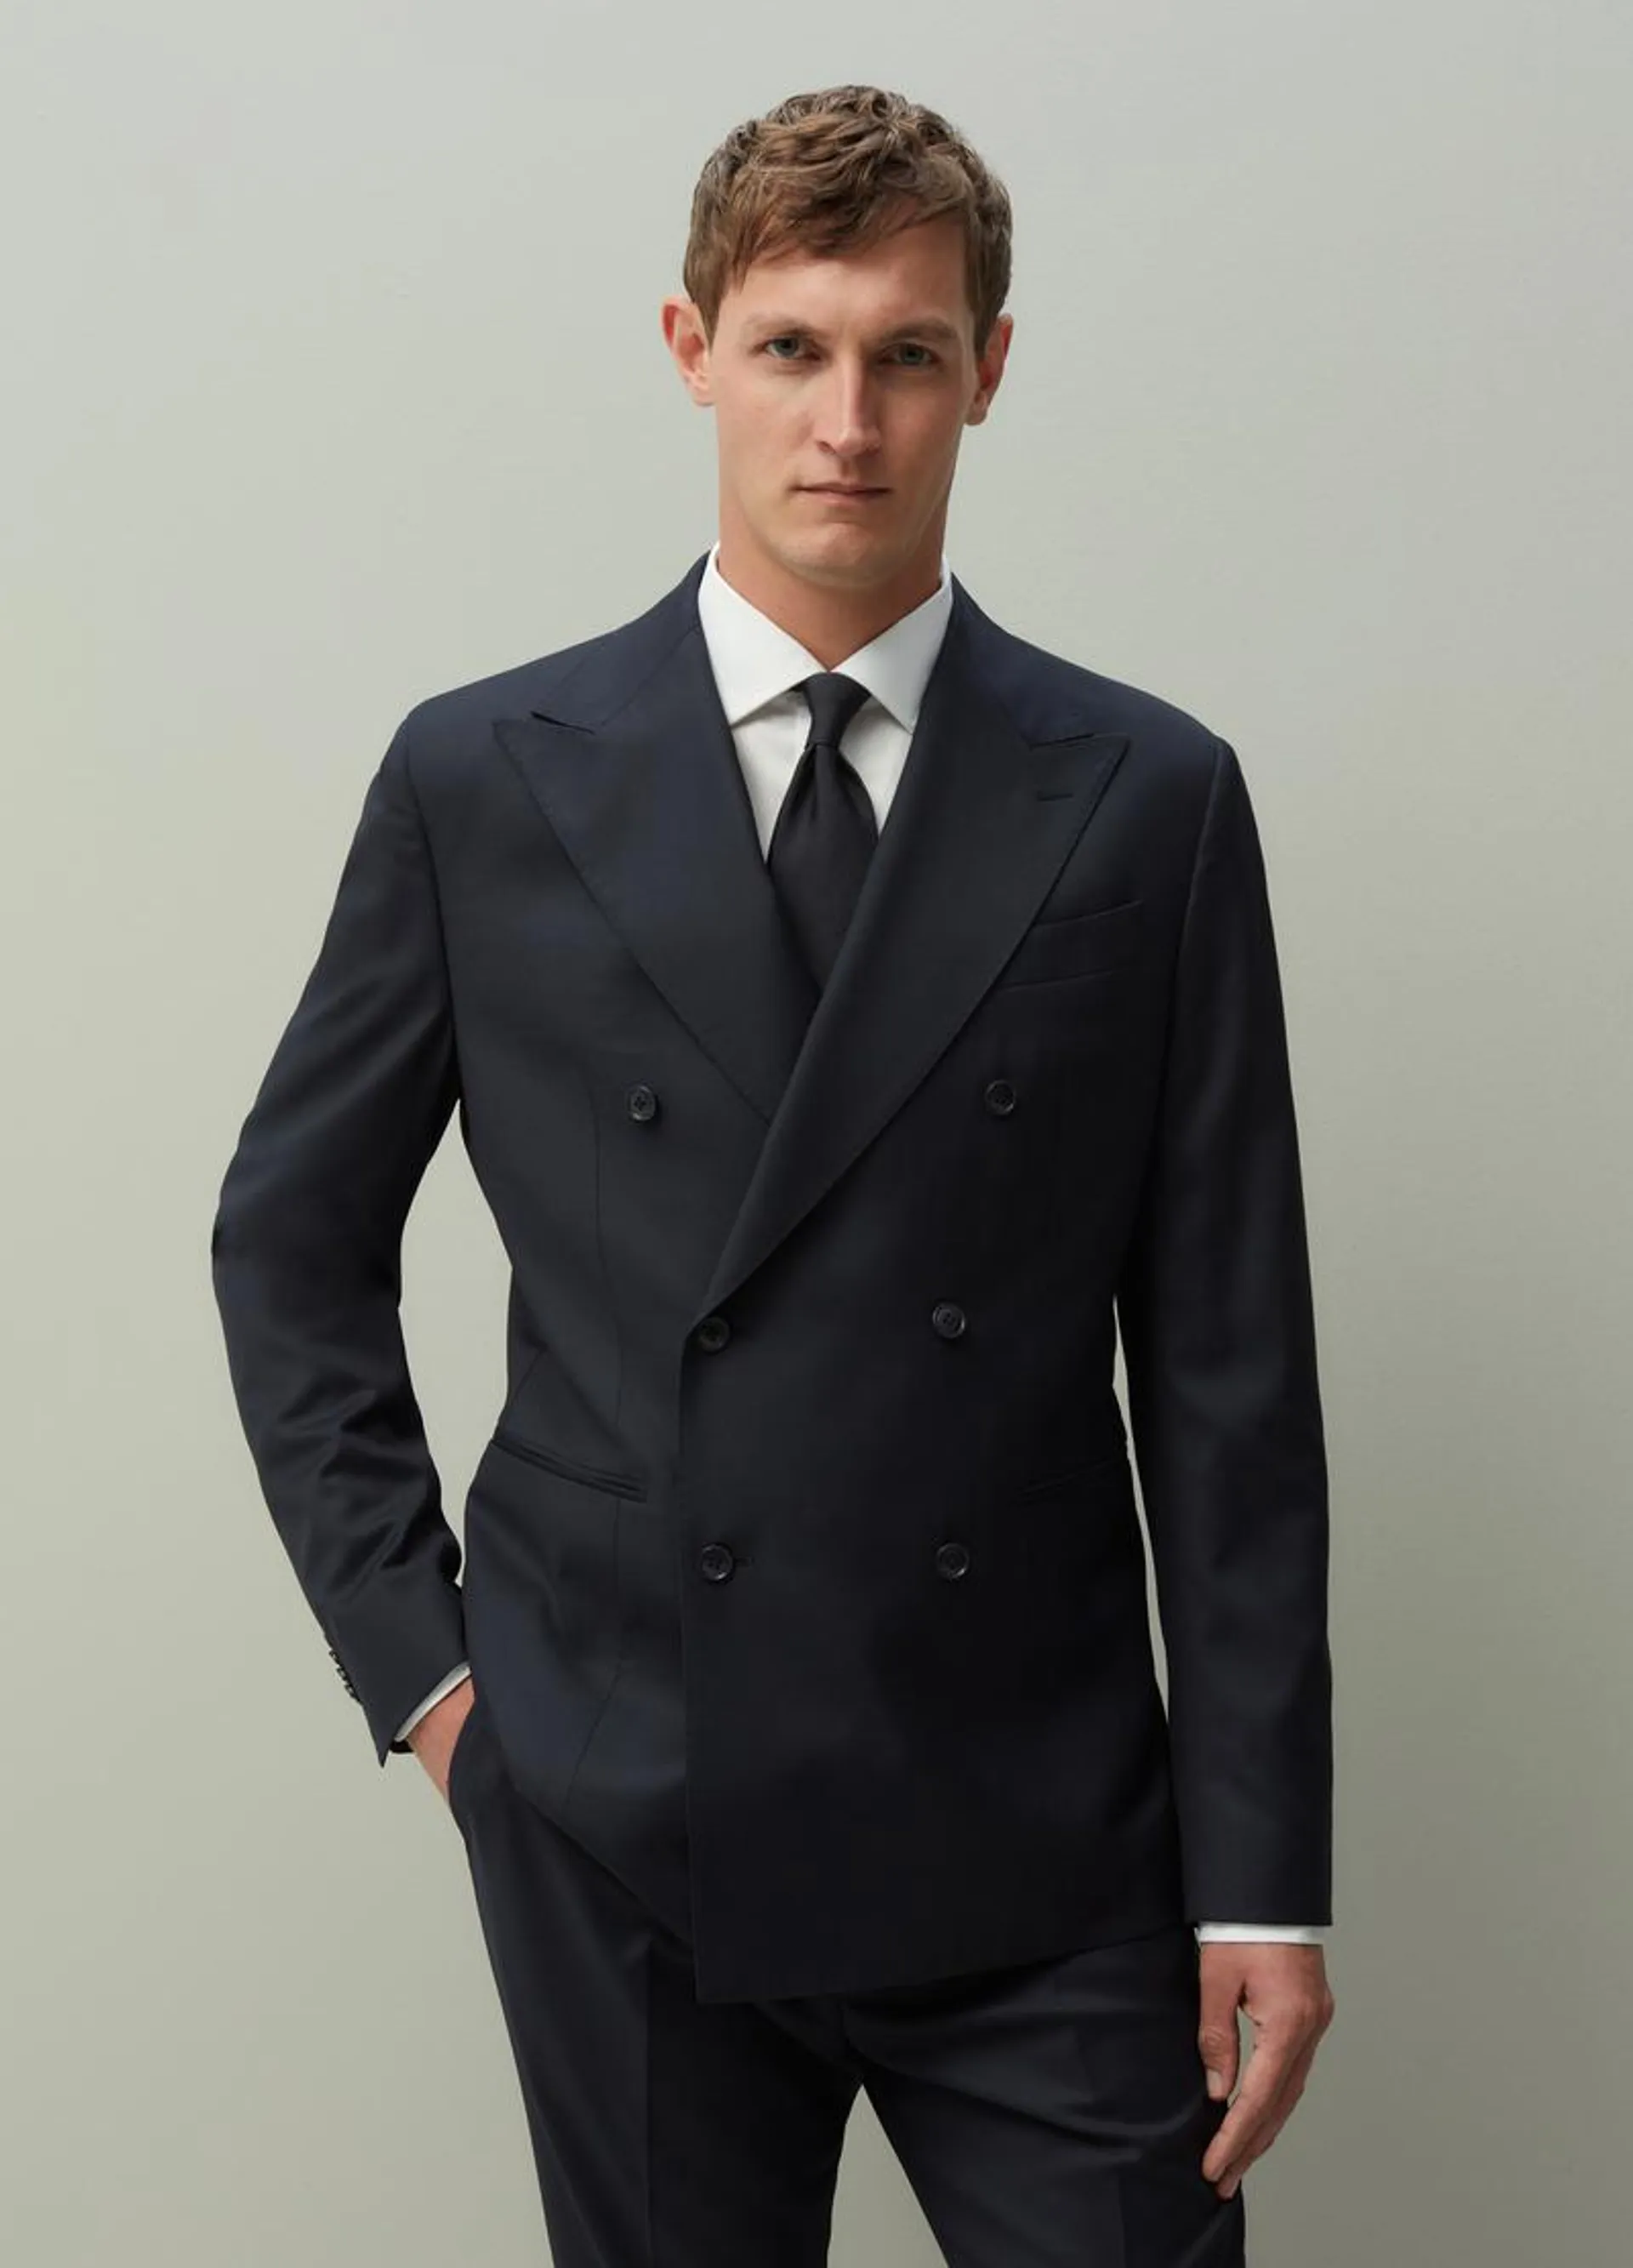 PIOMBO double-breasted formal blazer in navy blue